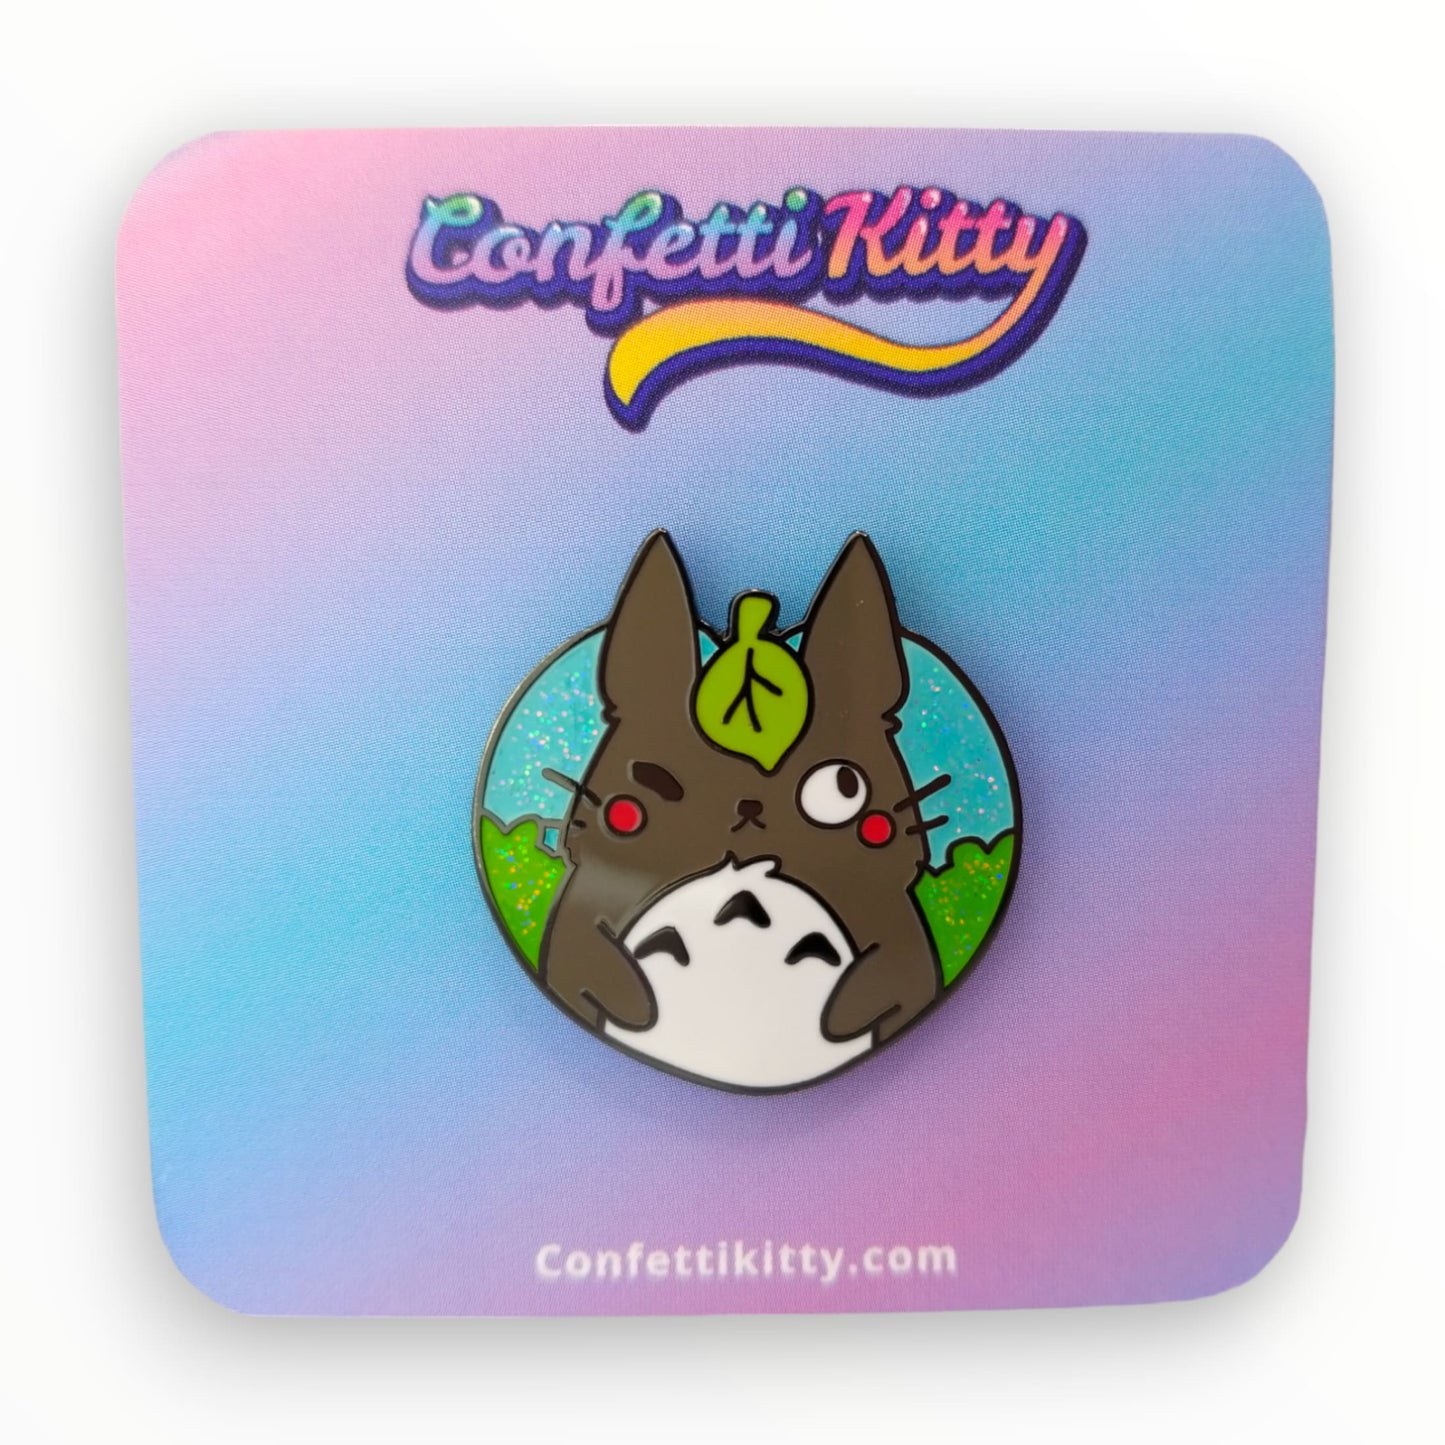 Sparkly Totoro Enamel Pin from Confetti Kitty, Only 12.99